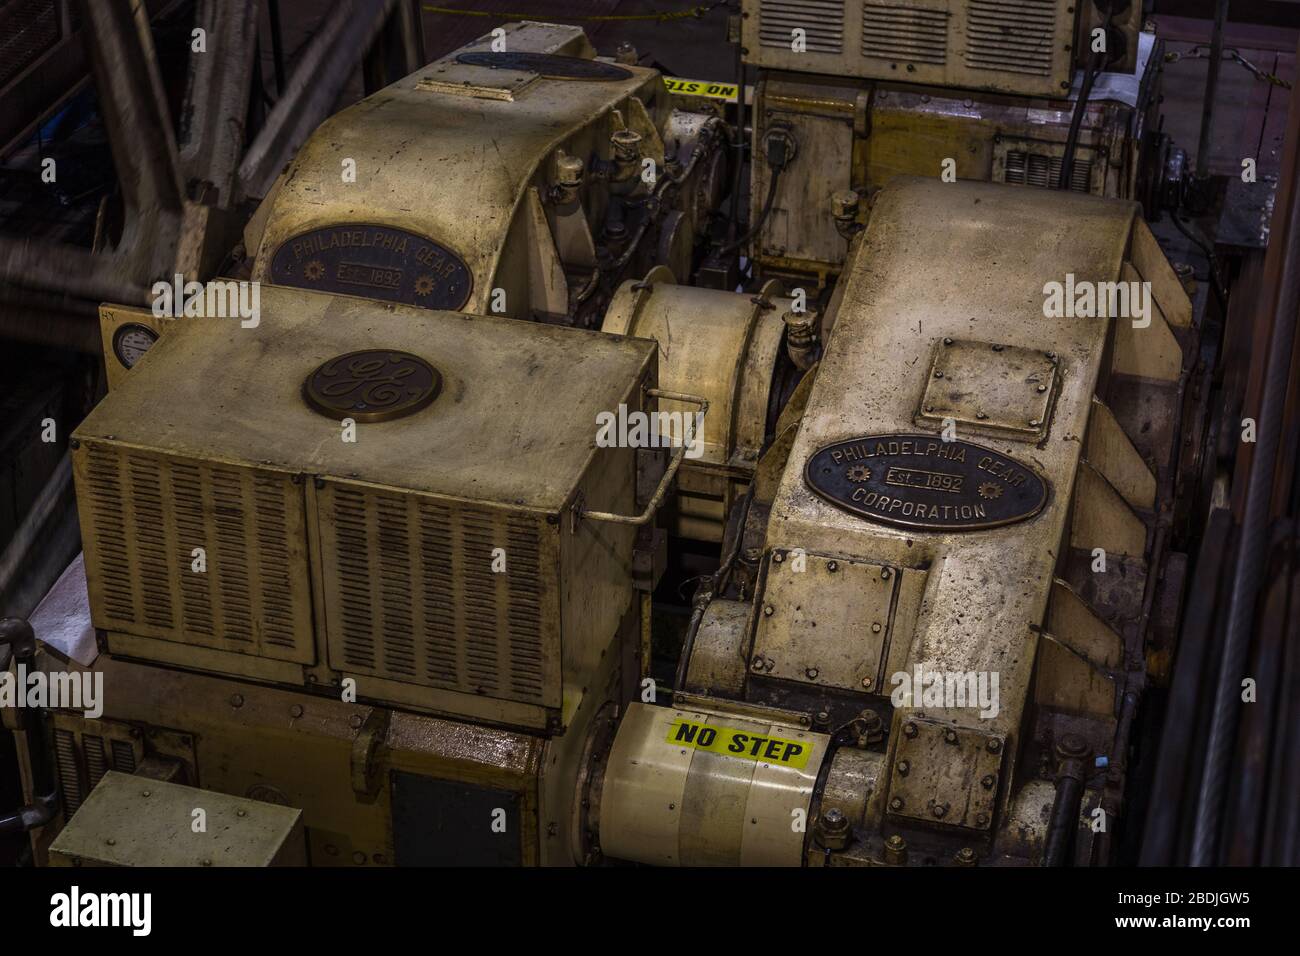 San Francisco, California, USA- 07 June 2015: Interiors and equipment in Cable Car Museum in San Francisco Cable Car Museum. Stock Photo